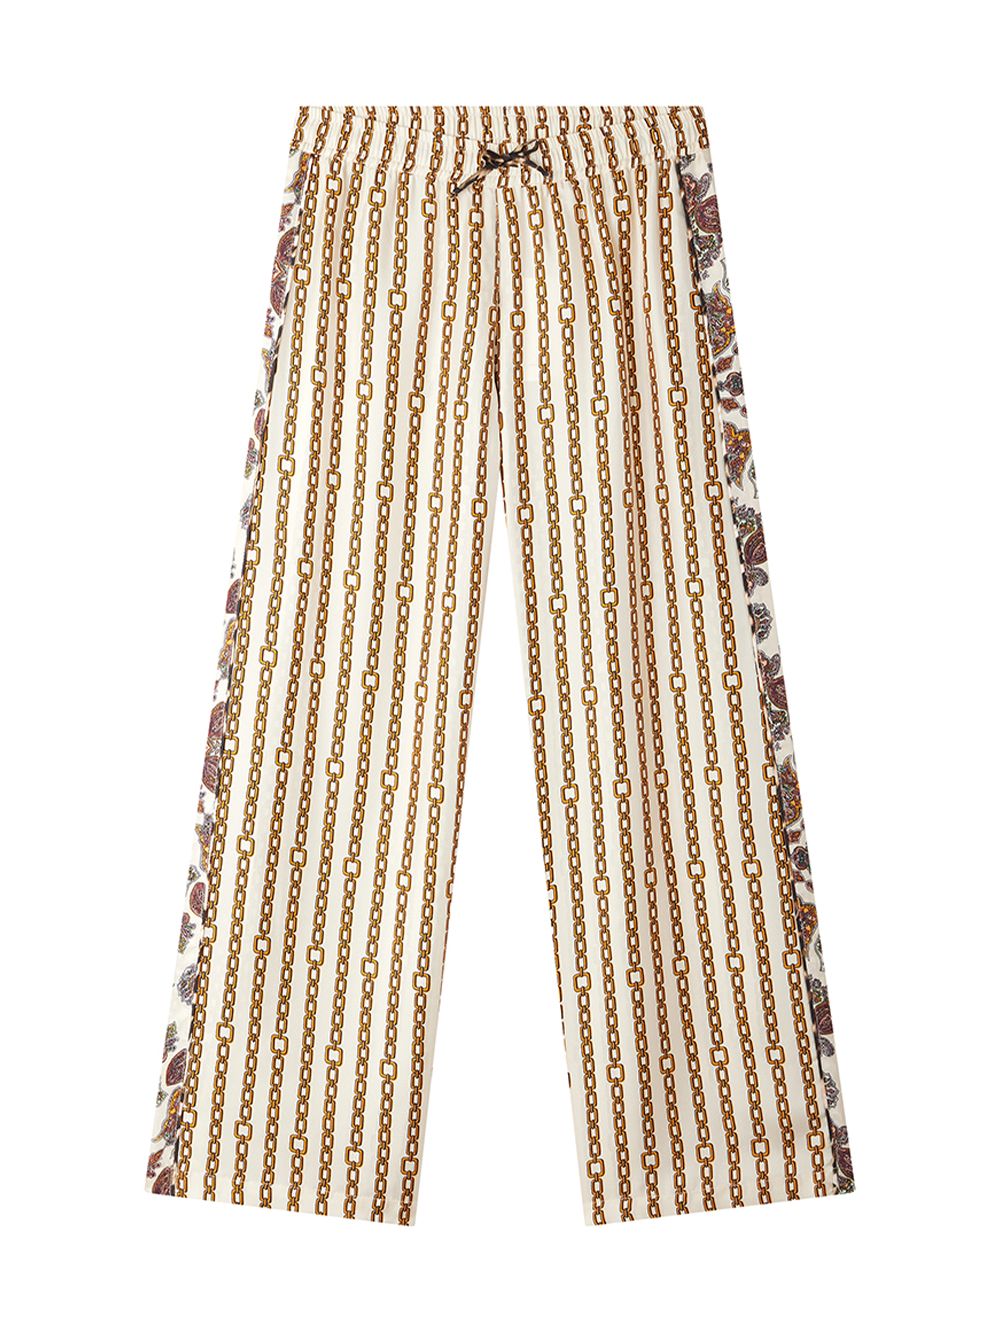 RING MIX CHAIN GOLD PANTS